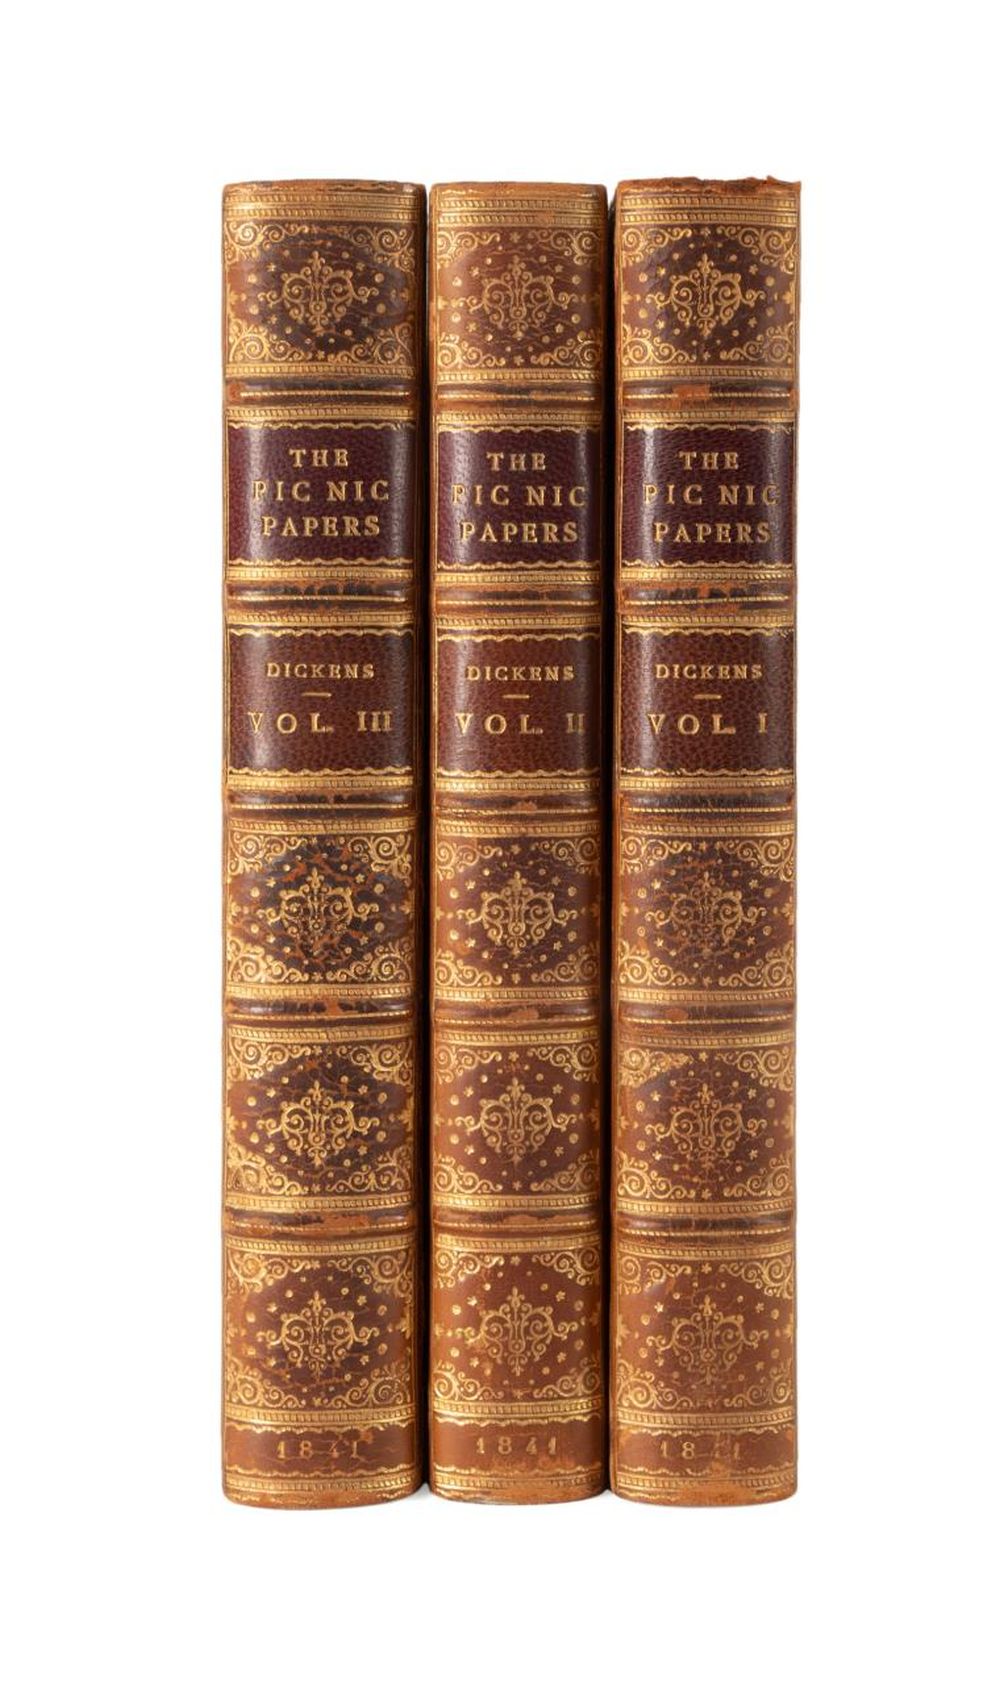 3VOL CHARLES DICKENS THE PIC NIC 3cd535